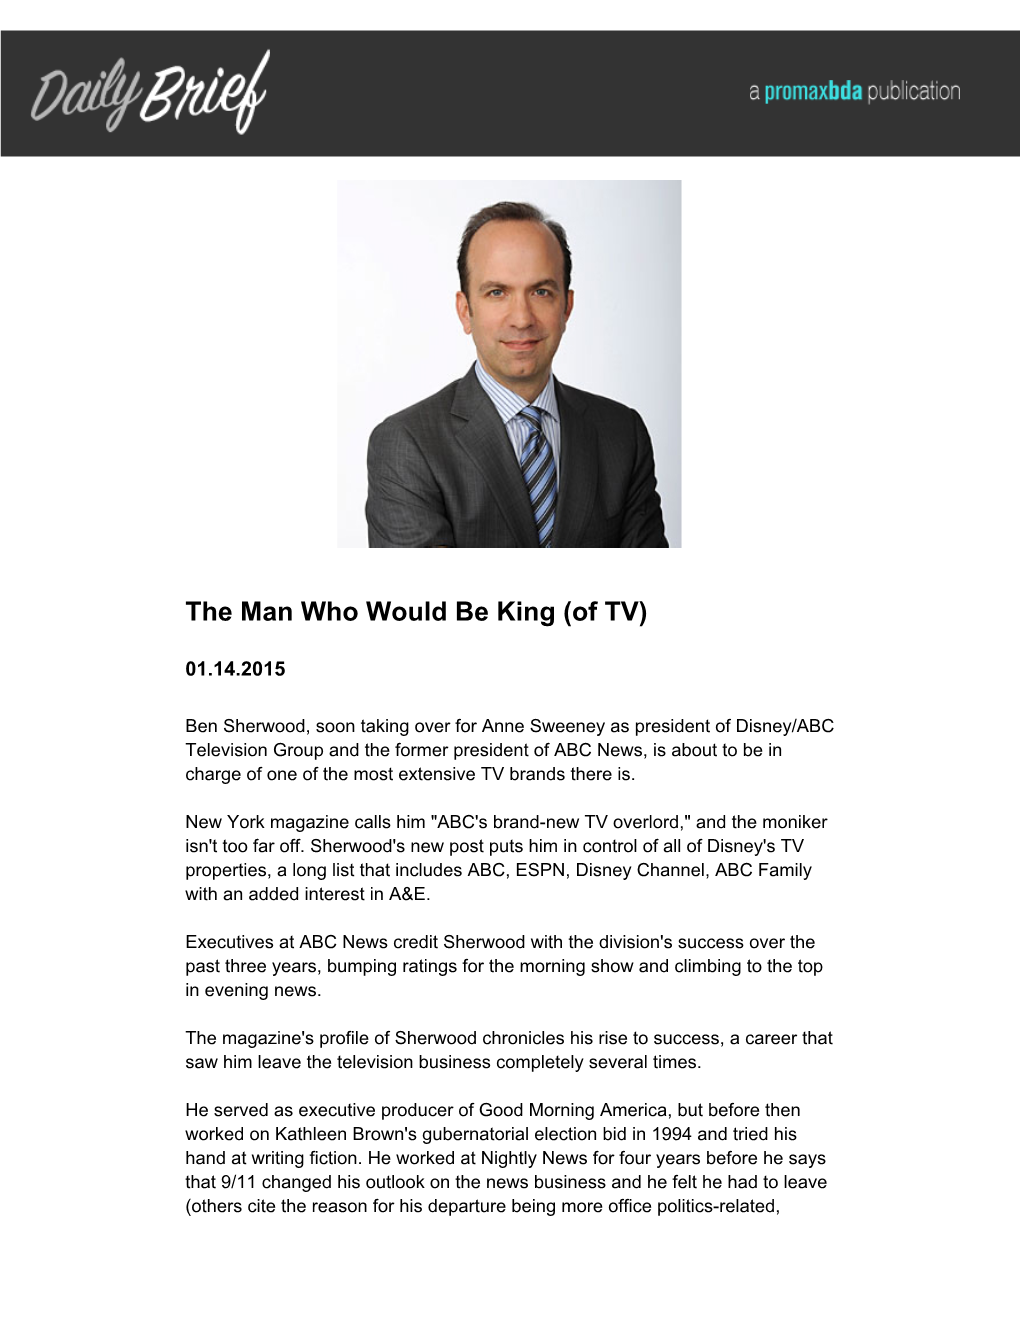 The Man Who Would Be King (Of TV)